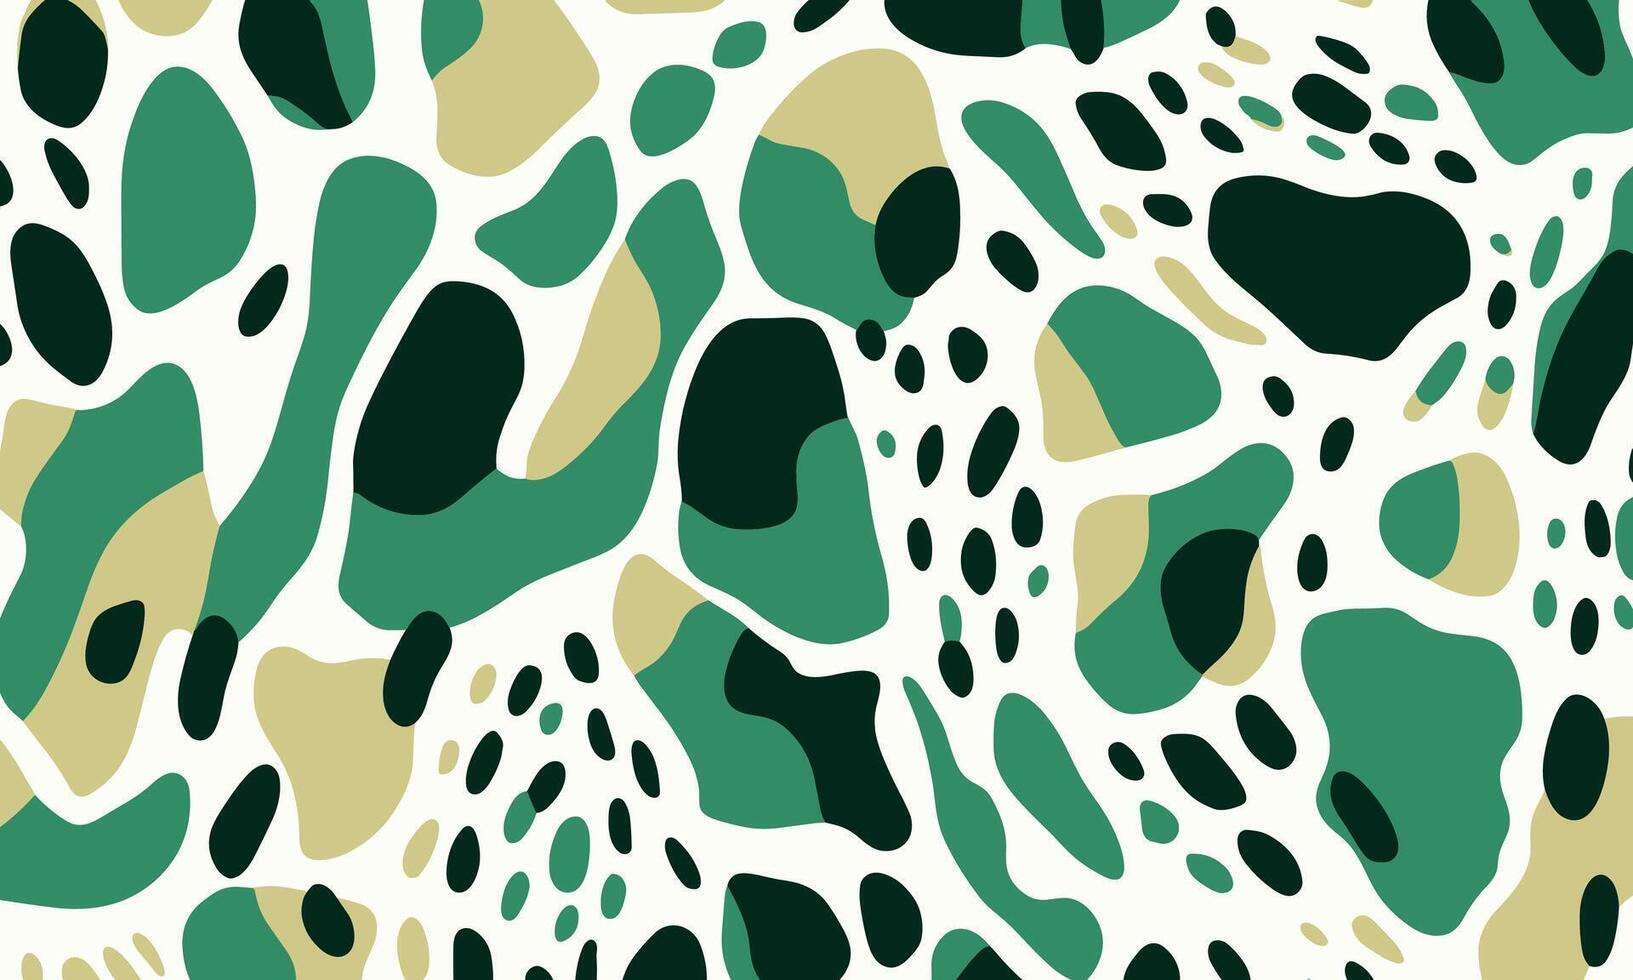 Seamless Pattern of Green and White Abstract Shapes, Resembling Spots or Leopard Print, With a Light White Background. The Design Incorporates Emerald Greens and Whites vector